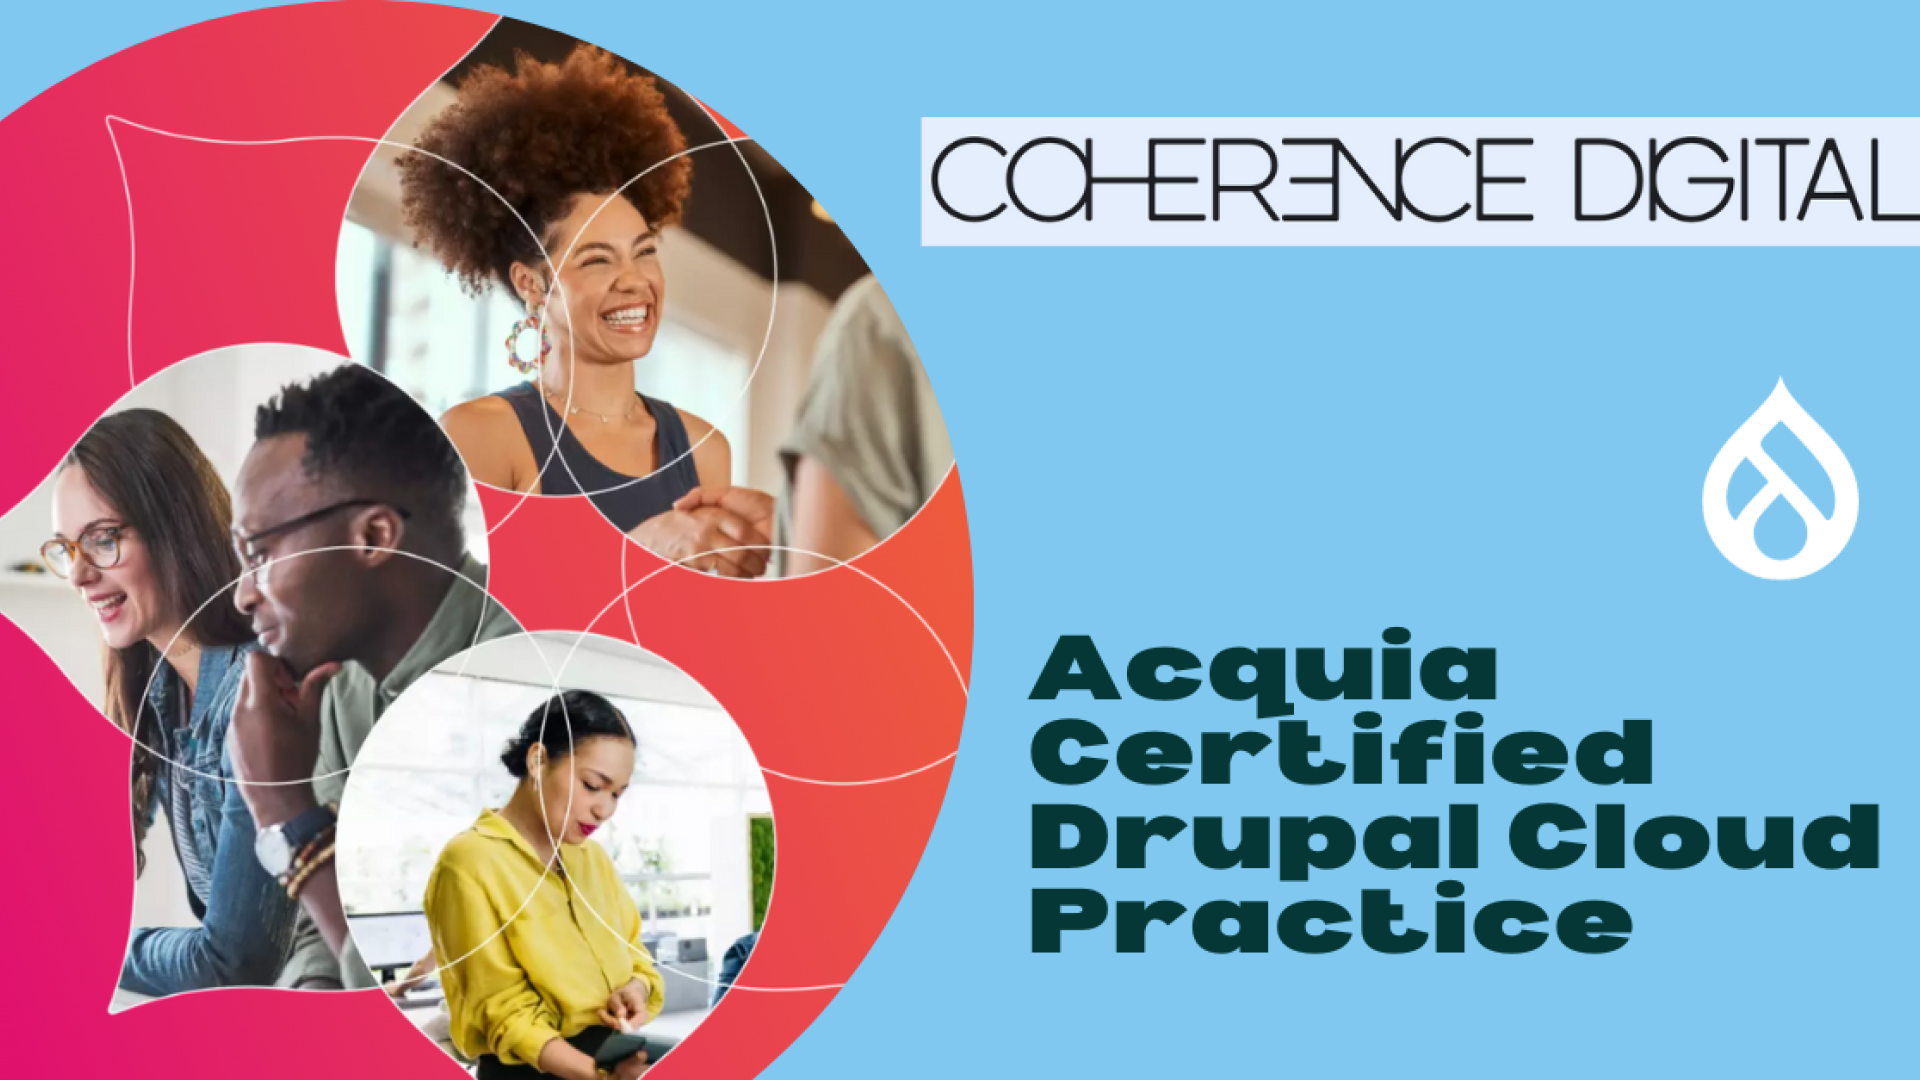 Coherence Digital now Acquia Certified Drupal Cloud Practice